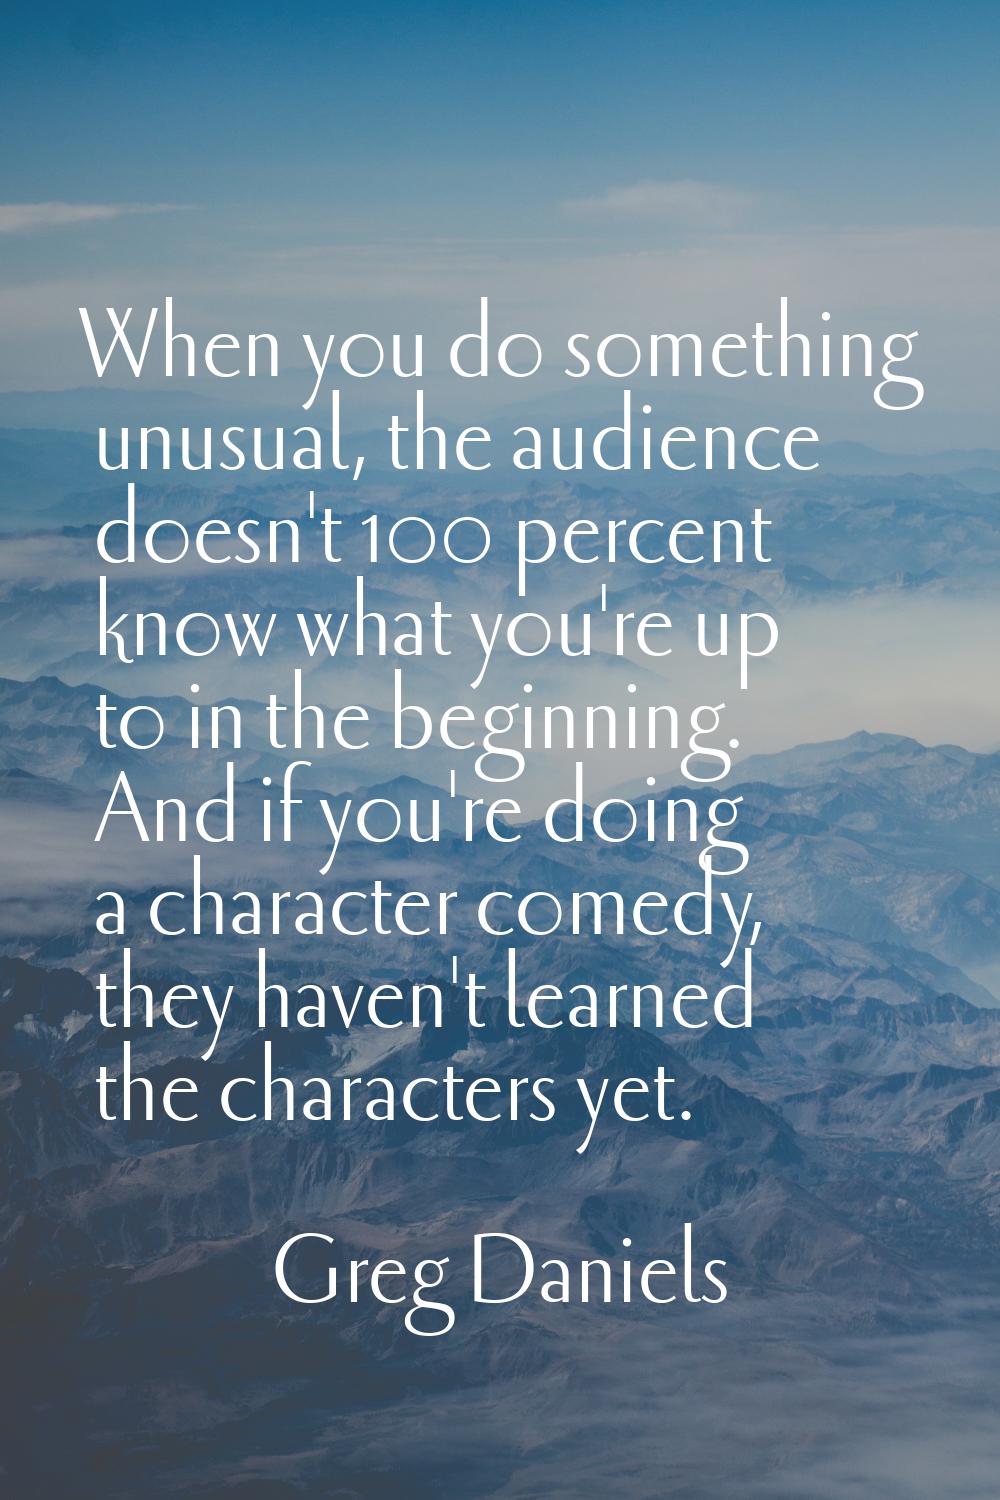 When you do something unusual, the audience doesn't 100 percent know what you're up to in the begin